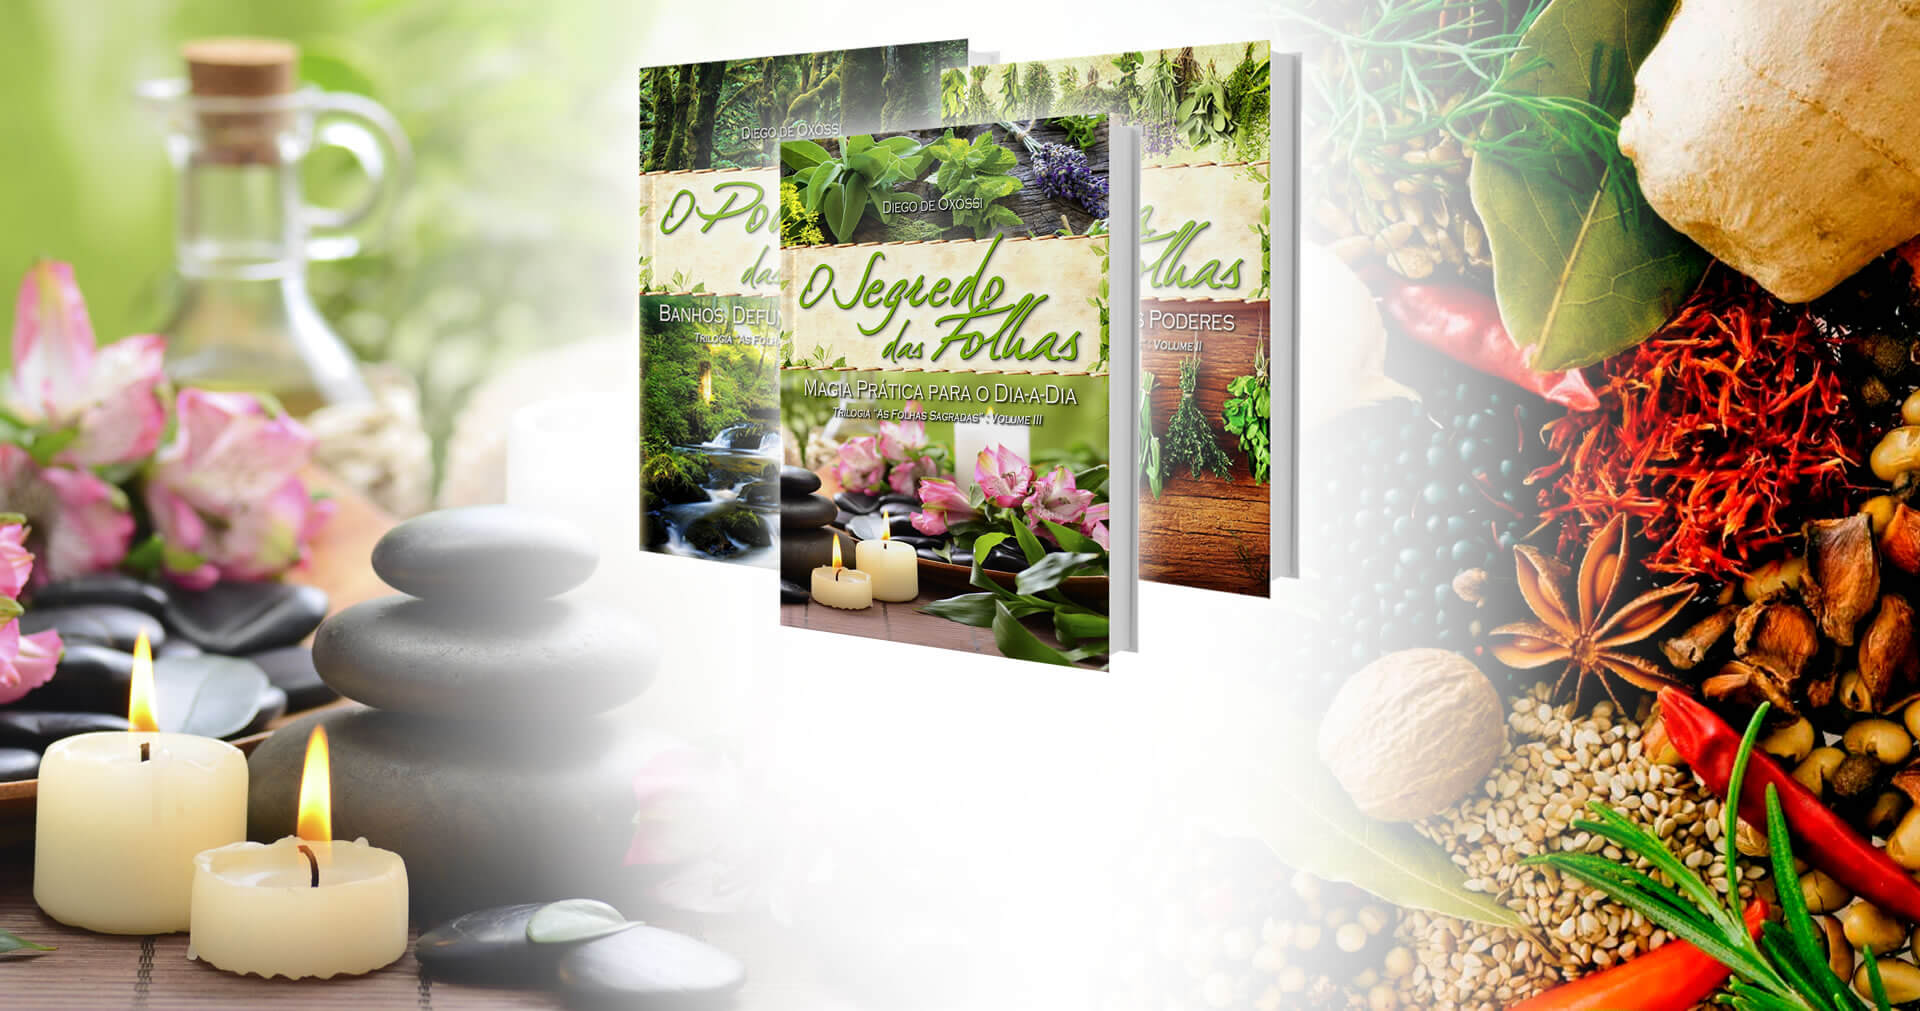 Arole Cultural | In volume 2 of the collection, babalosha Diego de Oxóssi presents the biggest dictionary of magic herbs in Brazil, with 365 plants in details.